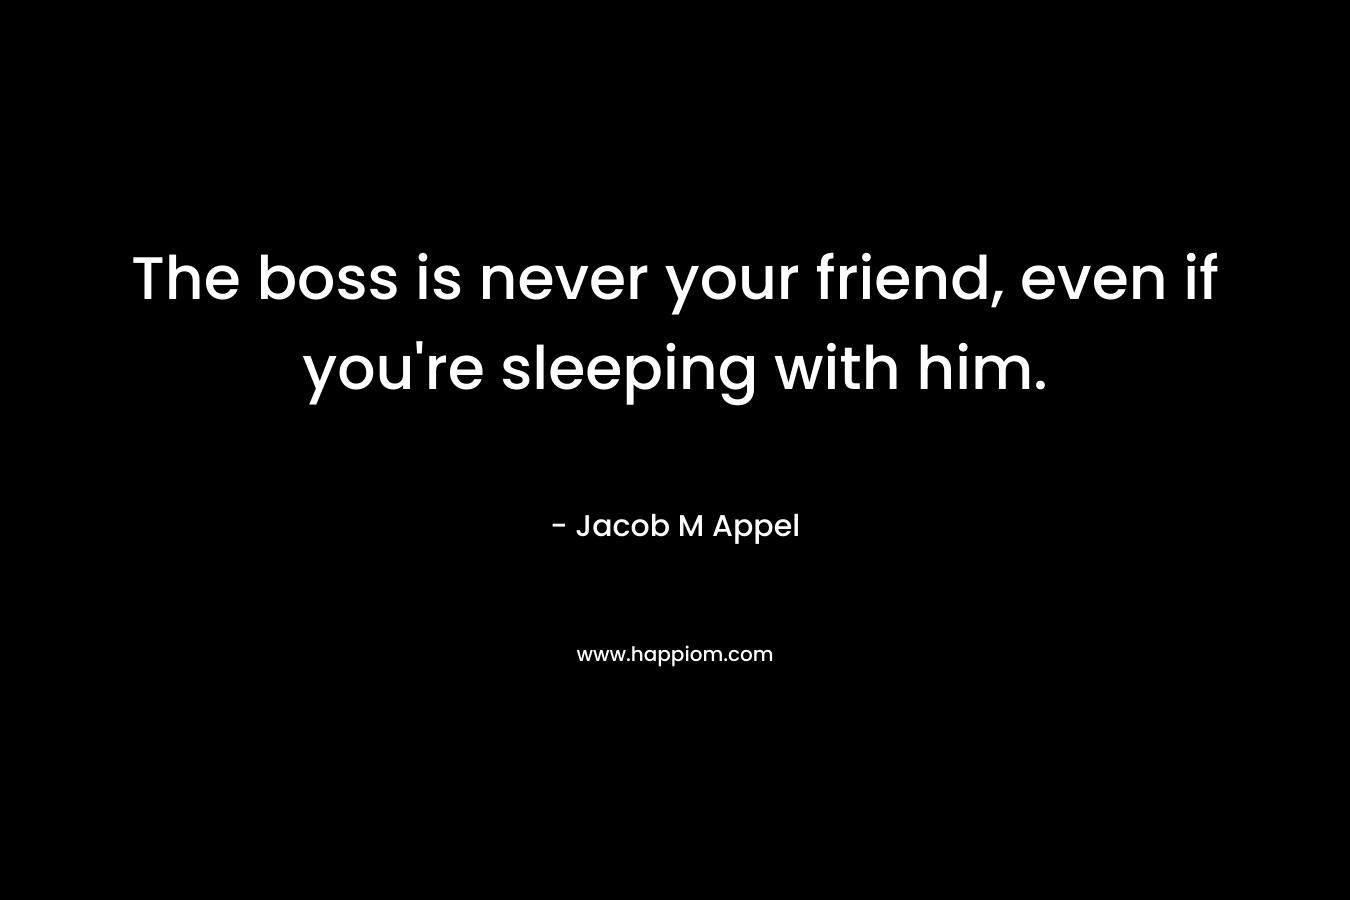 The boss is never your friend, even if you're sleeping with him.